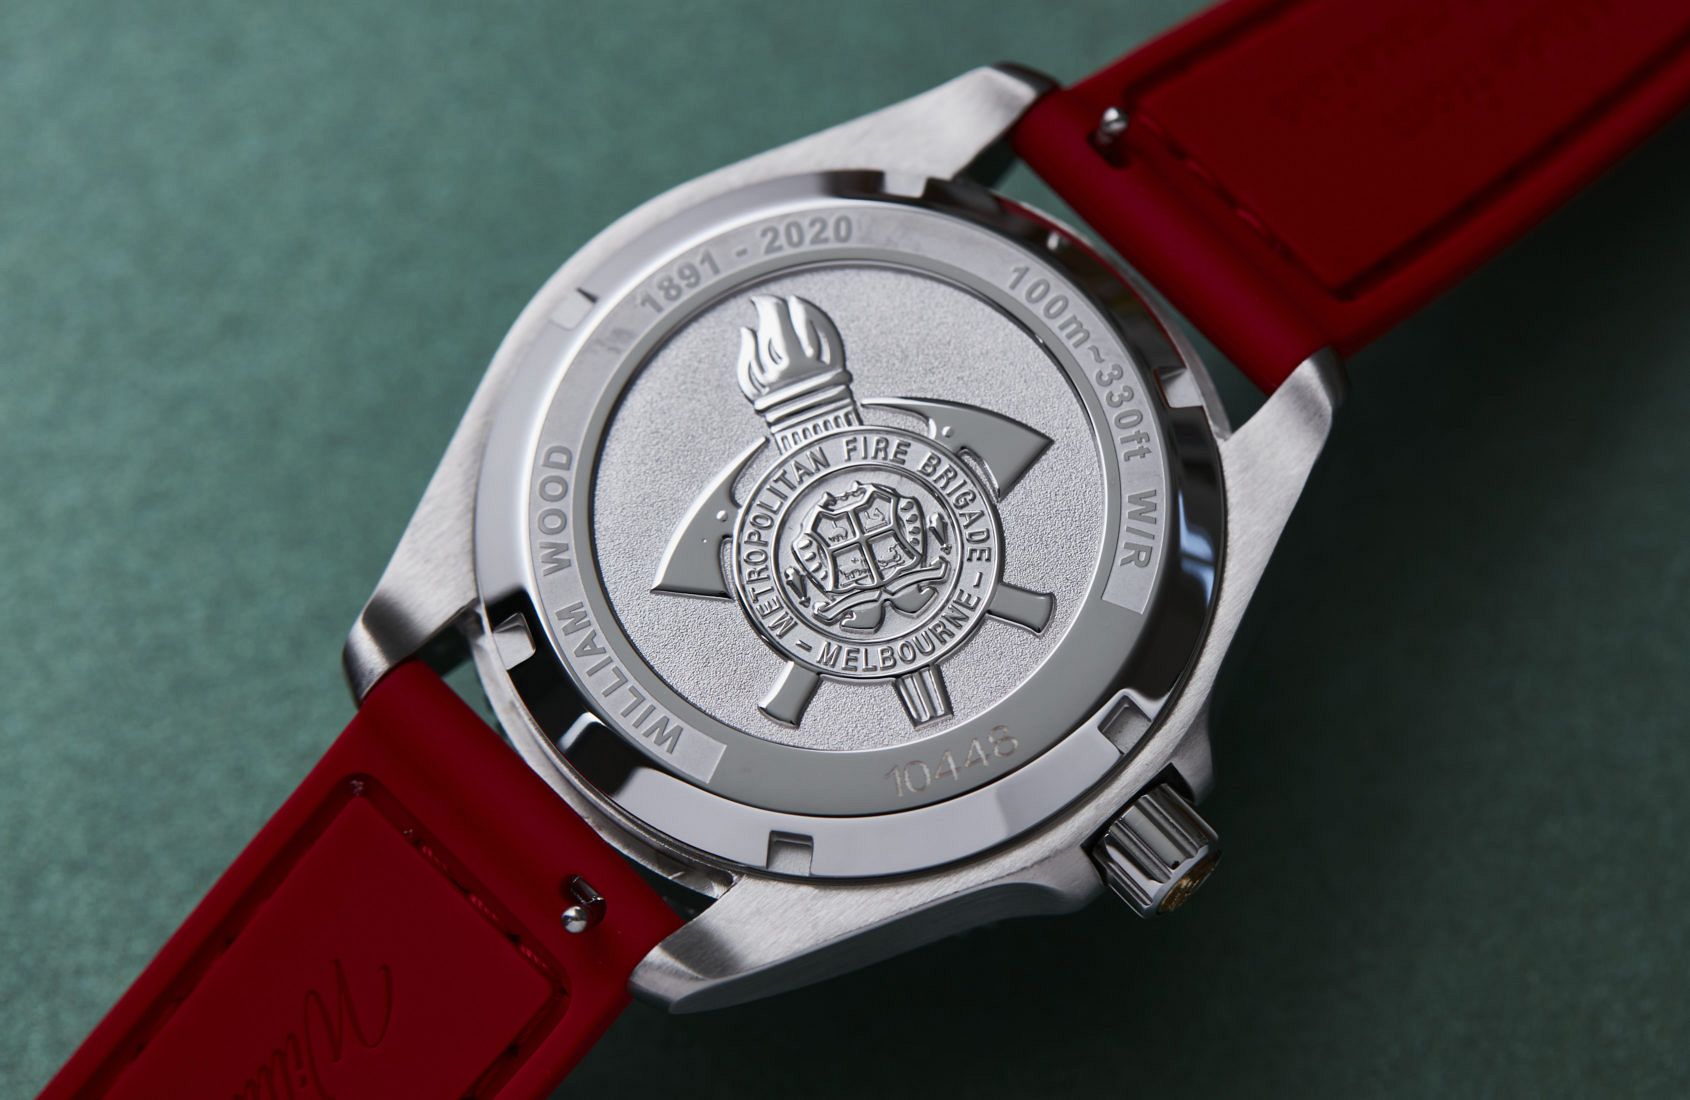 Hose before bros: William Wood make a customised watch for the Melbourne Metropolitan Fire Brigade!